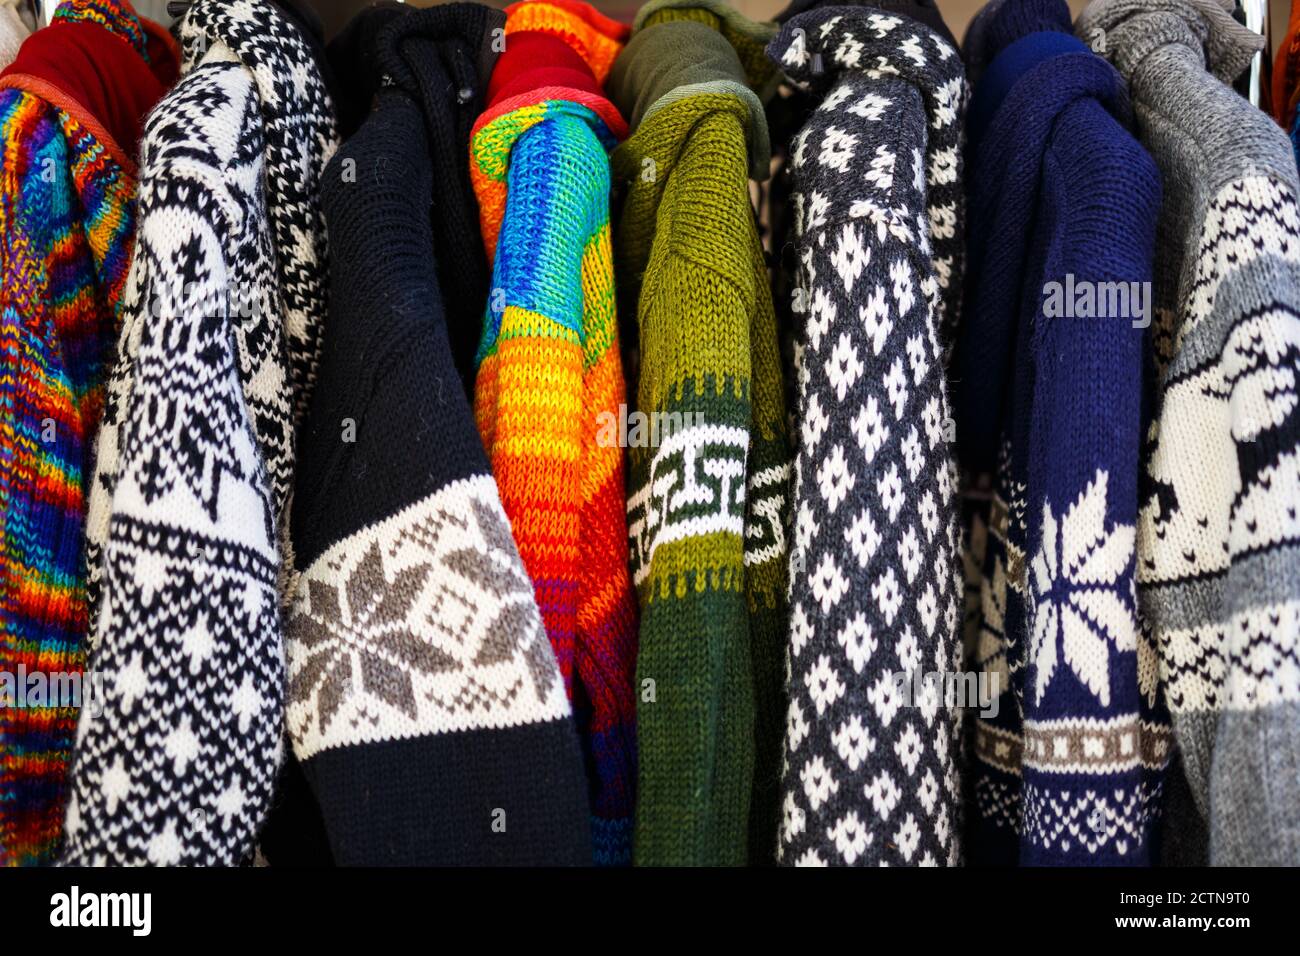 Closeup shot of colorful winter clothes hanging on the rack Stock Photo